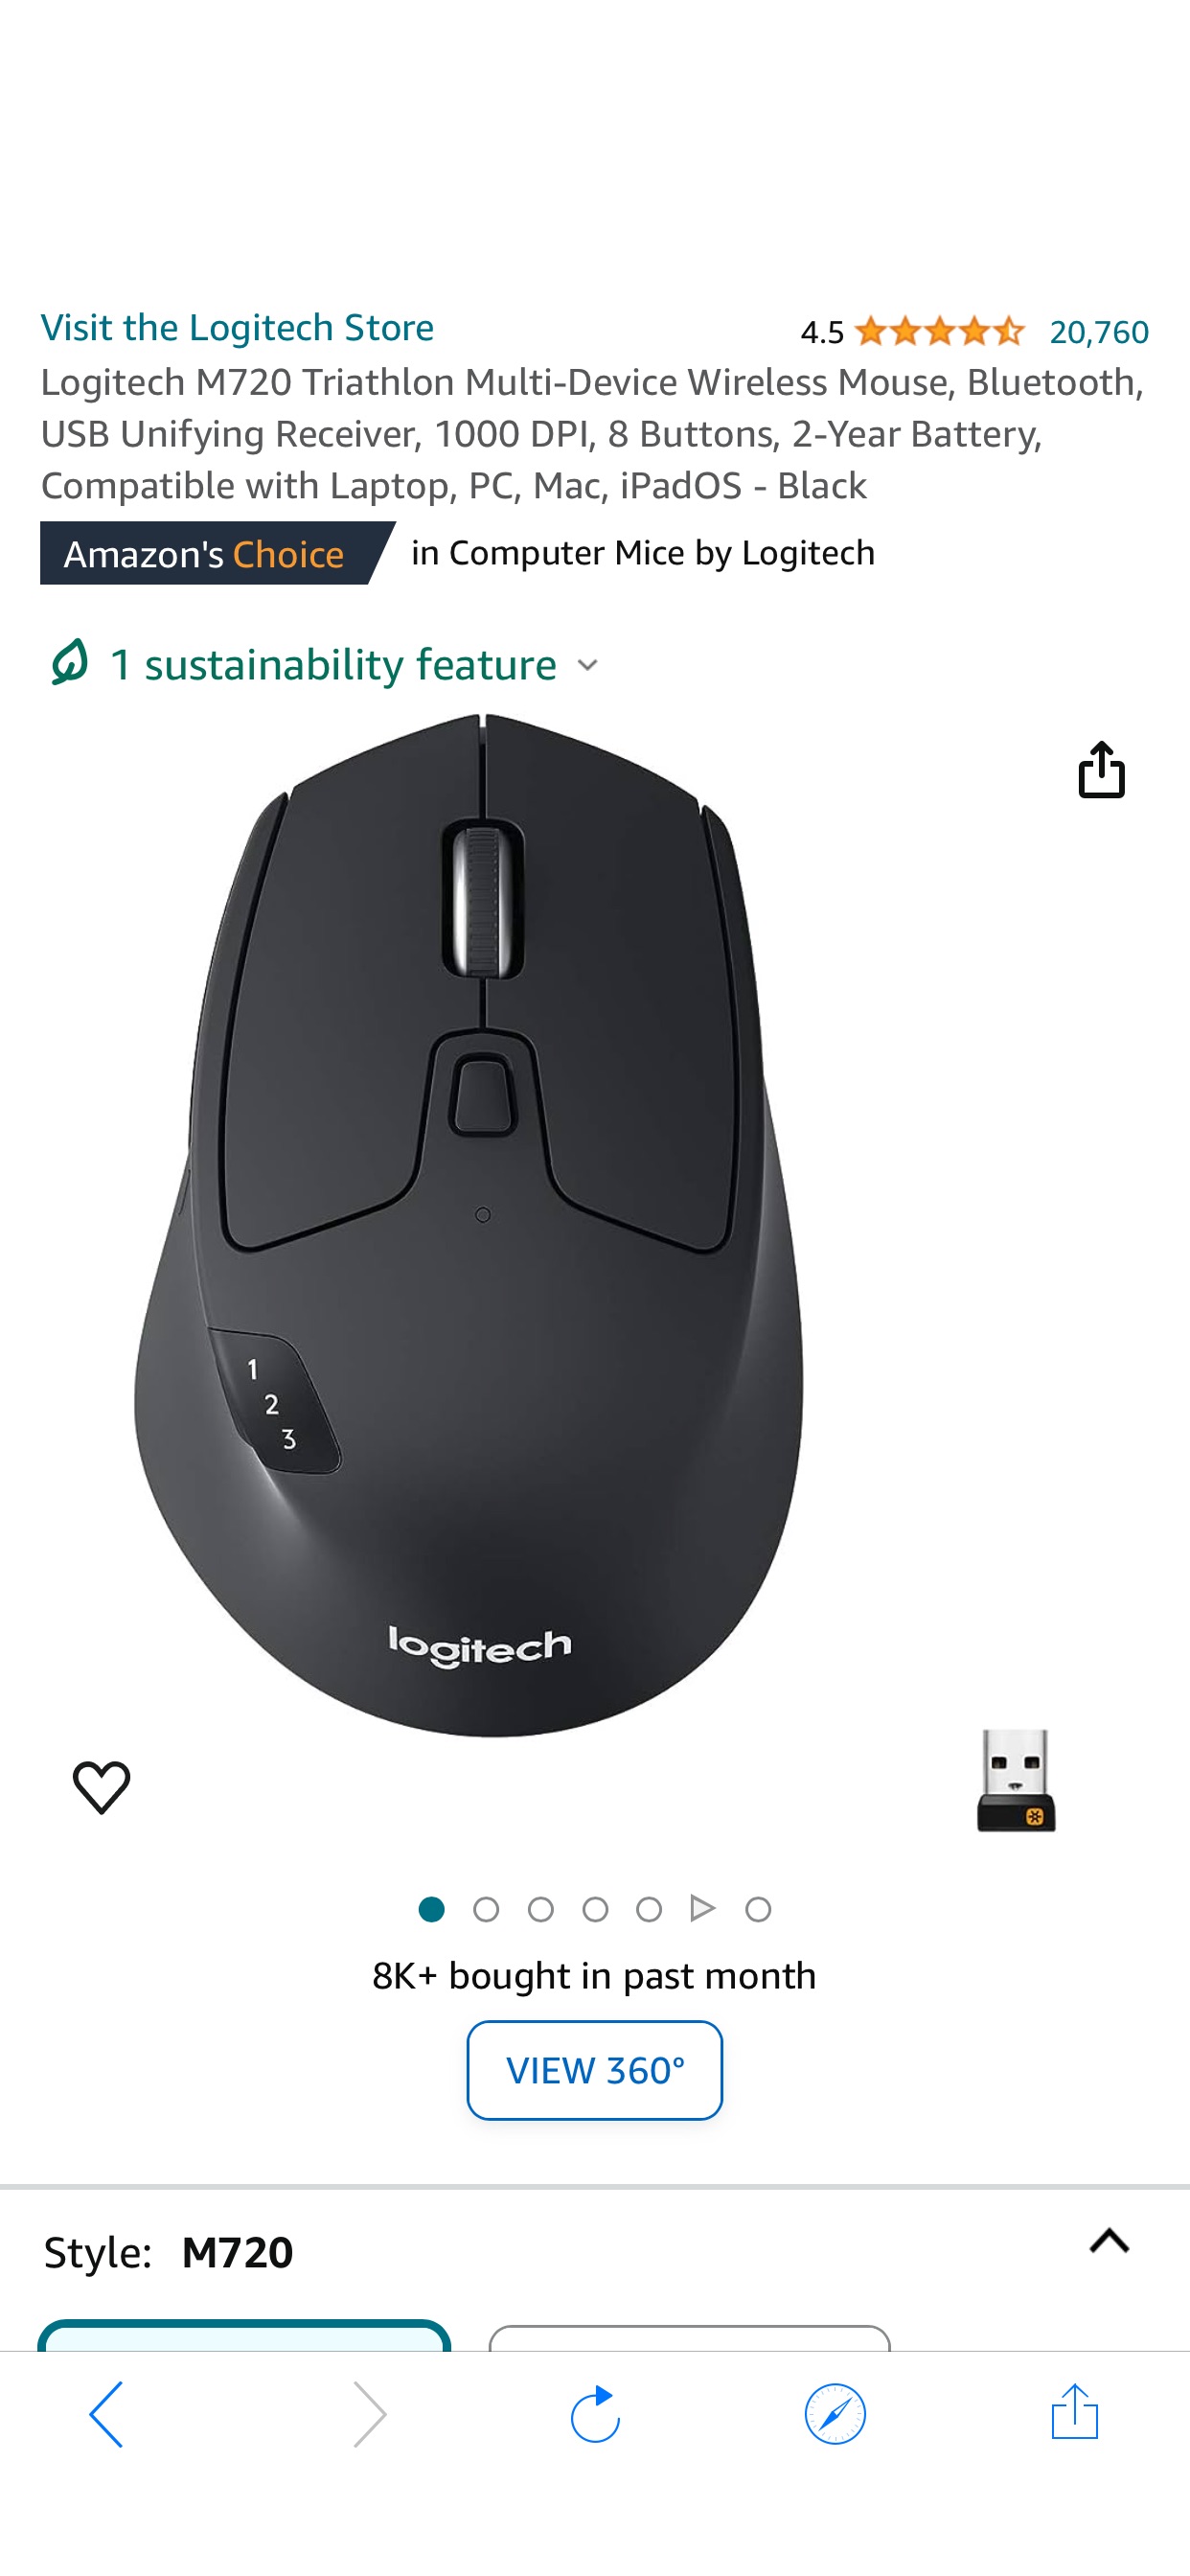 Amazon.com: Logitech M720 Triathlon Multi-Device Wireless Mouse, Bluetooth, USB Unifying Receiver, 1000 DPI, 8 Buttons, 2-Year Battery, Compatible with Laptop, PC, Mac, iPadOS - Black : Electronics 罗技